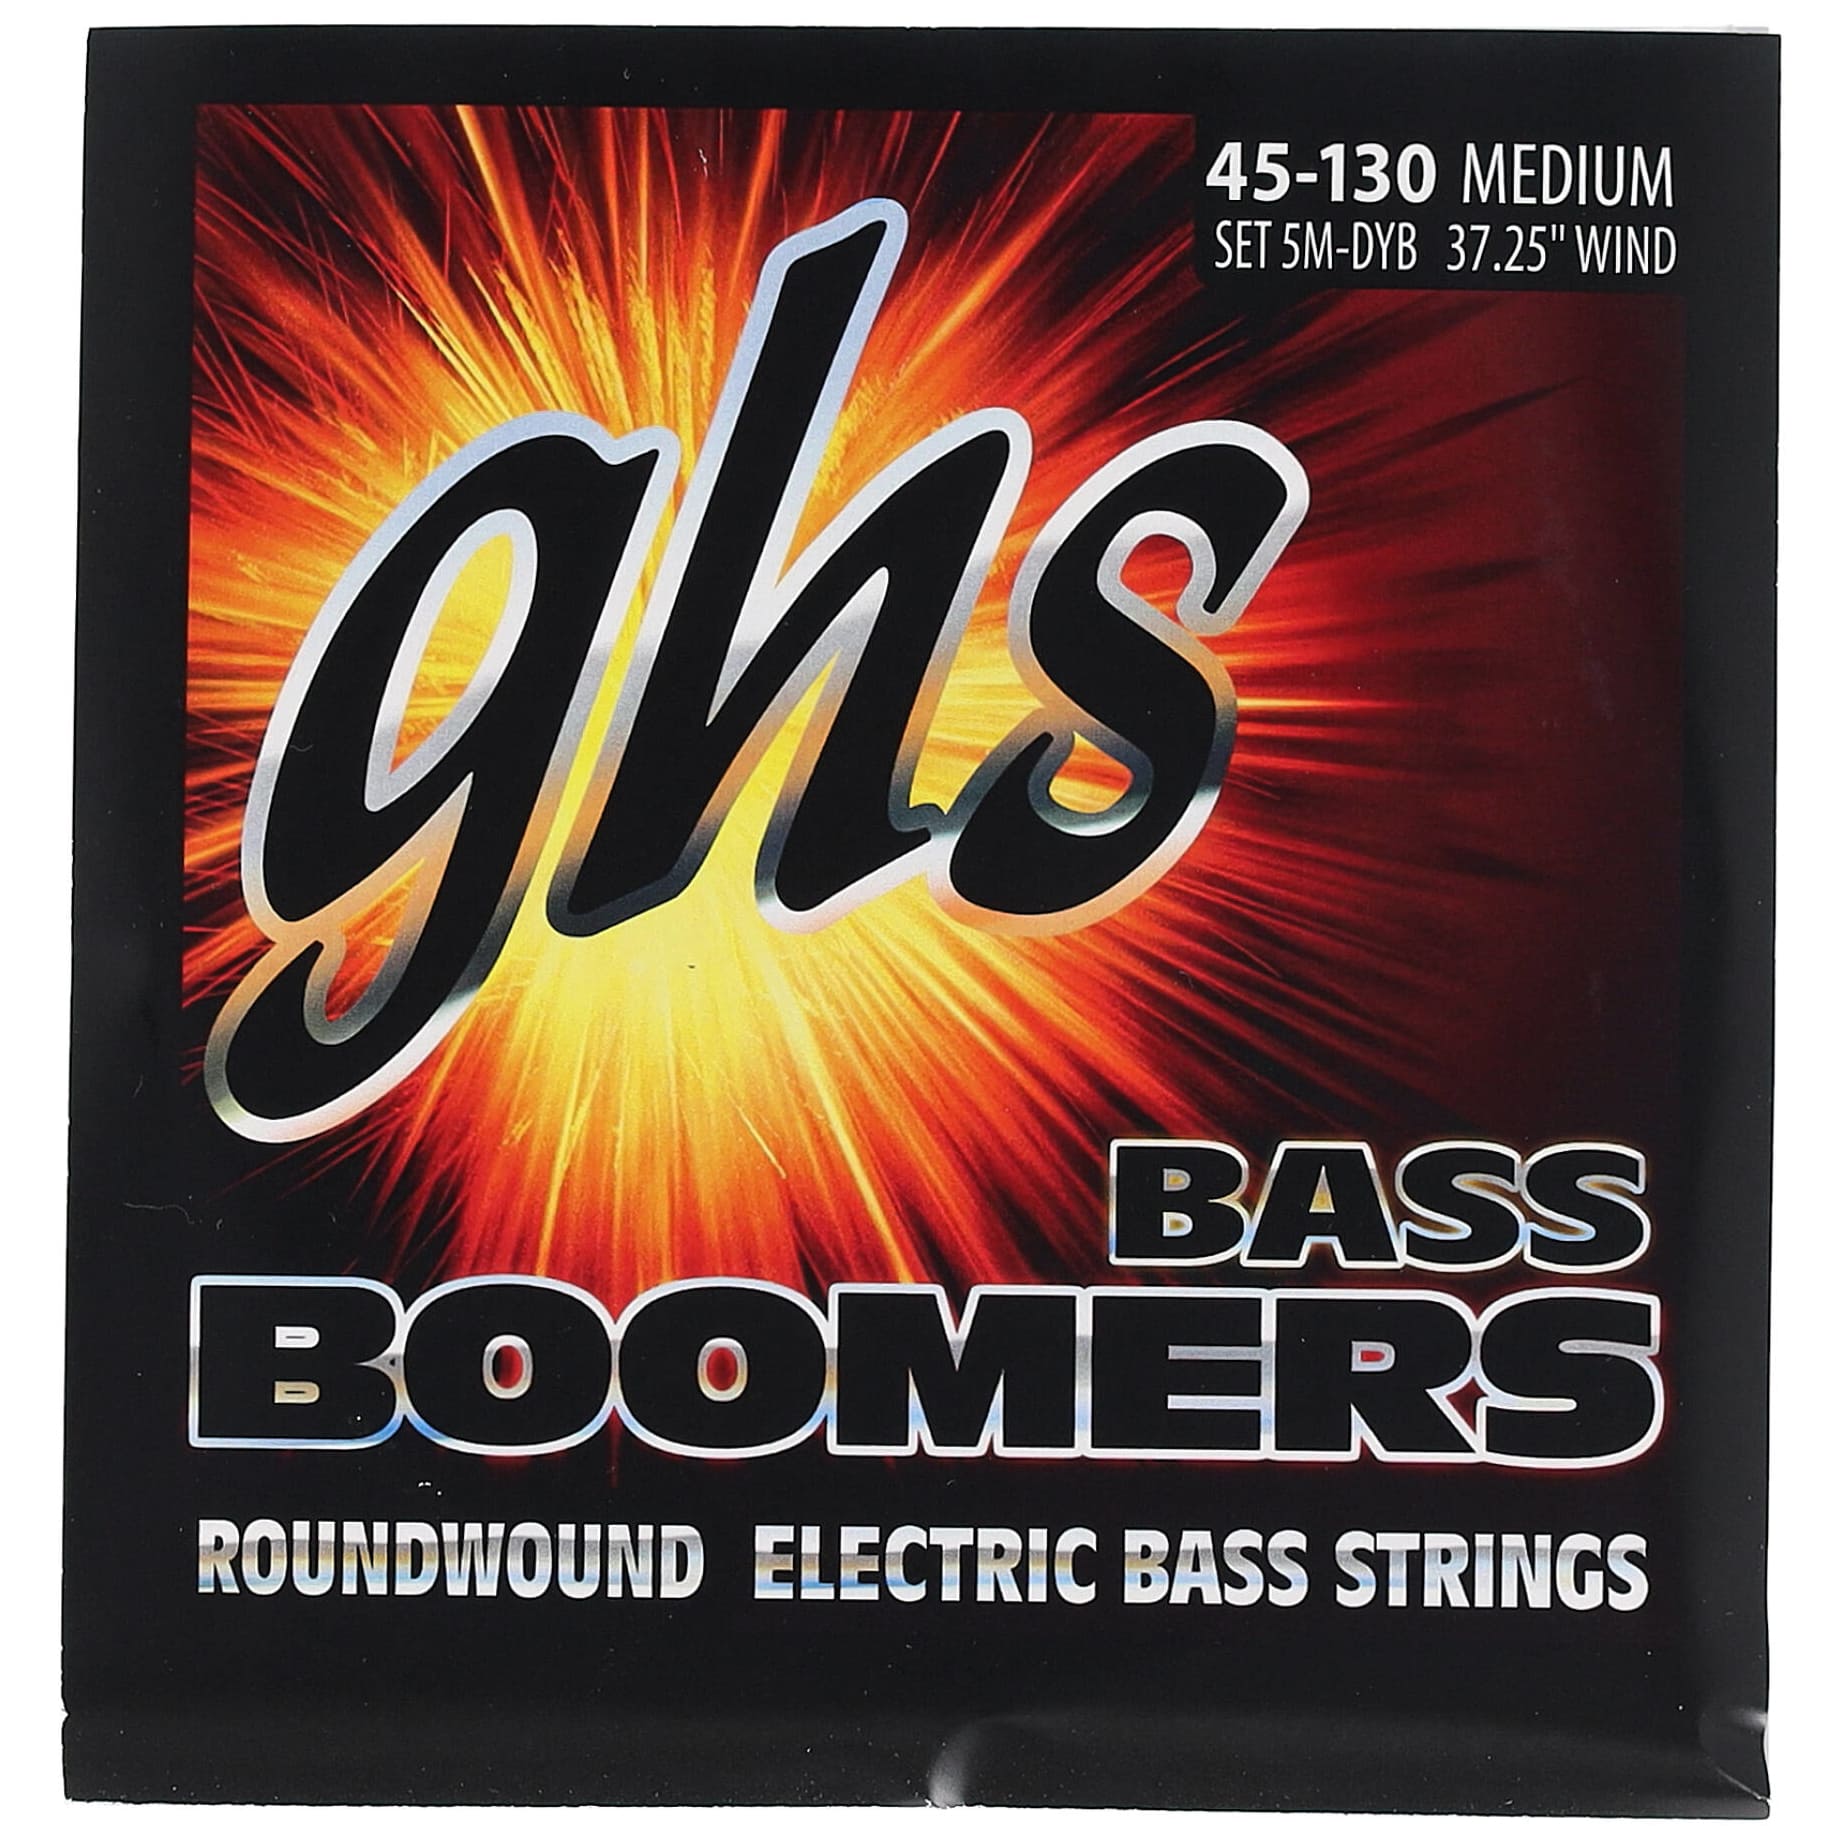 GHS 3045 5 M DYB Boomers